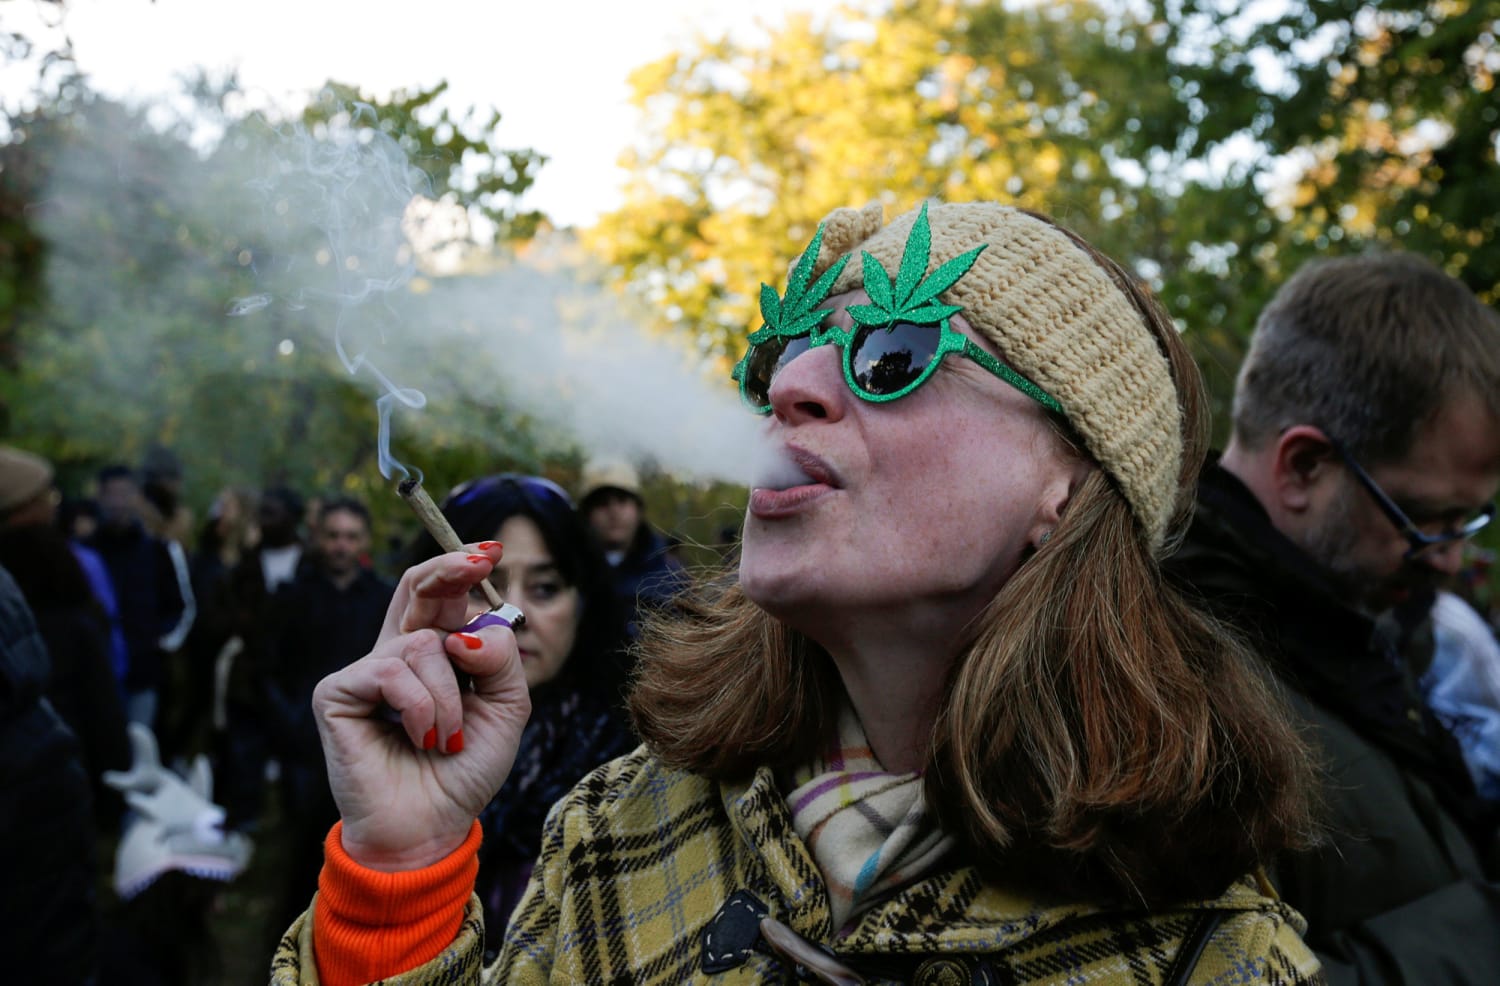 Chronic Pot Use May Have Serious Effects On The Brain Experts Say